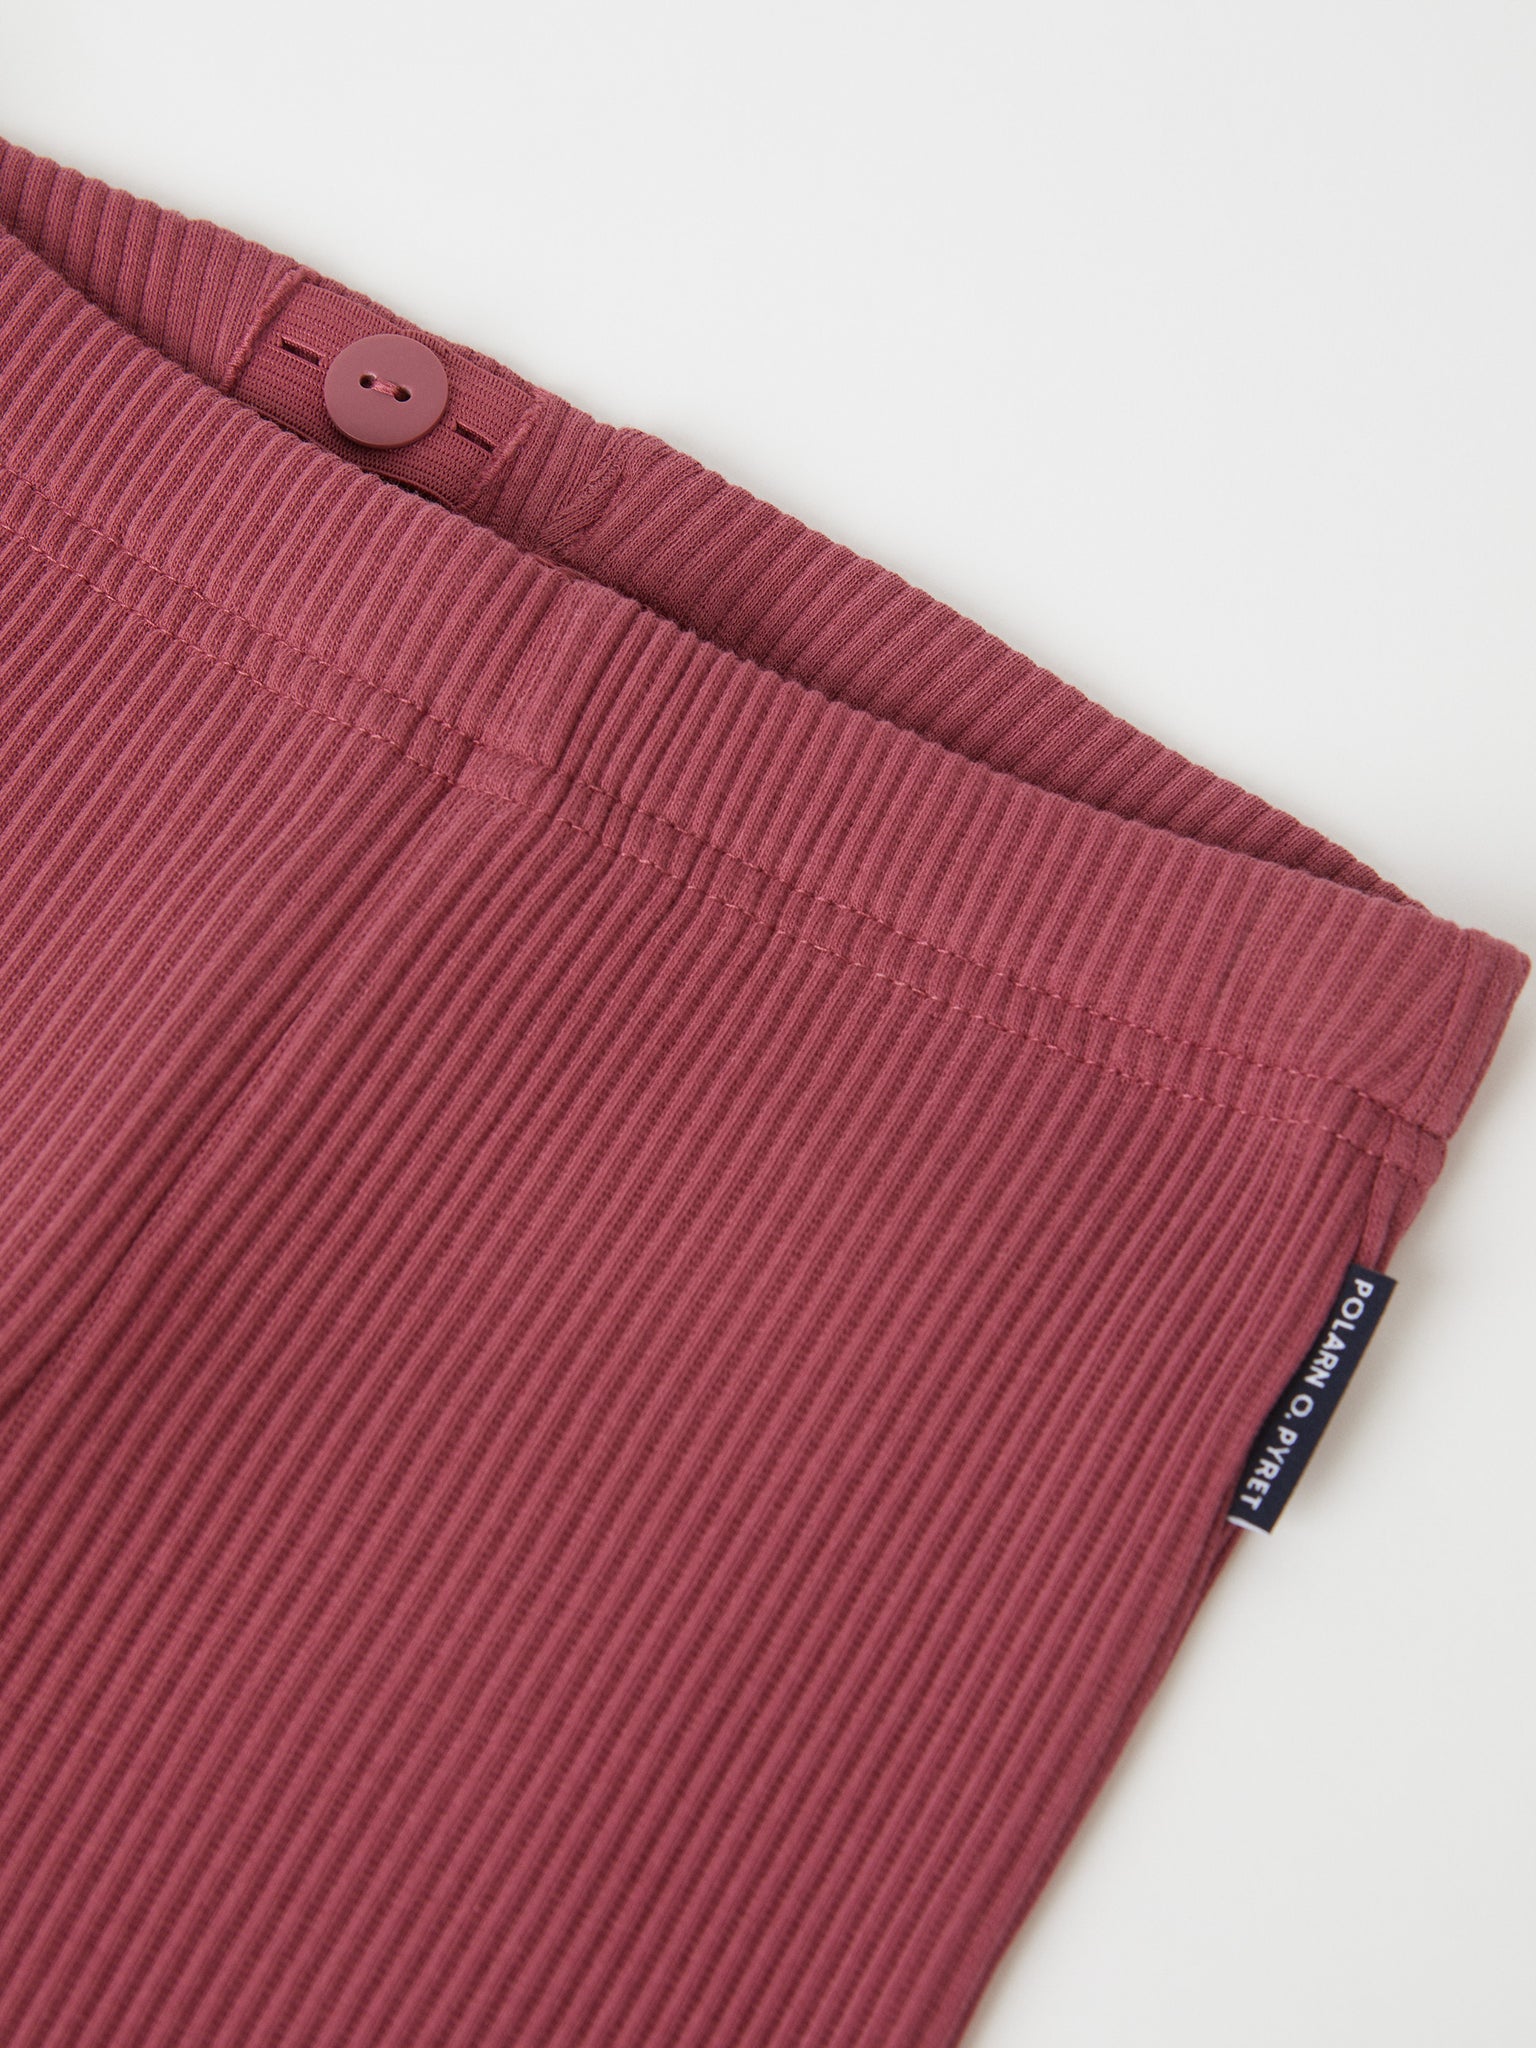 Organic Cotton Red Ribbed Kids Leggings from the Polarn O. Pyret kidswear collection. The best ethical kids clothes